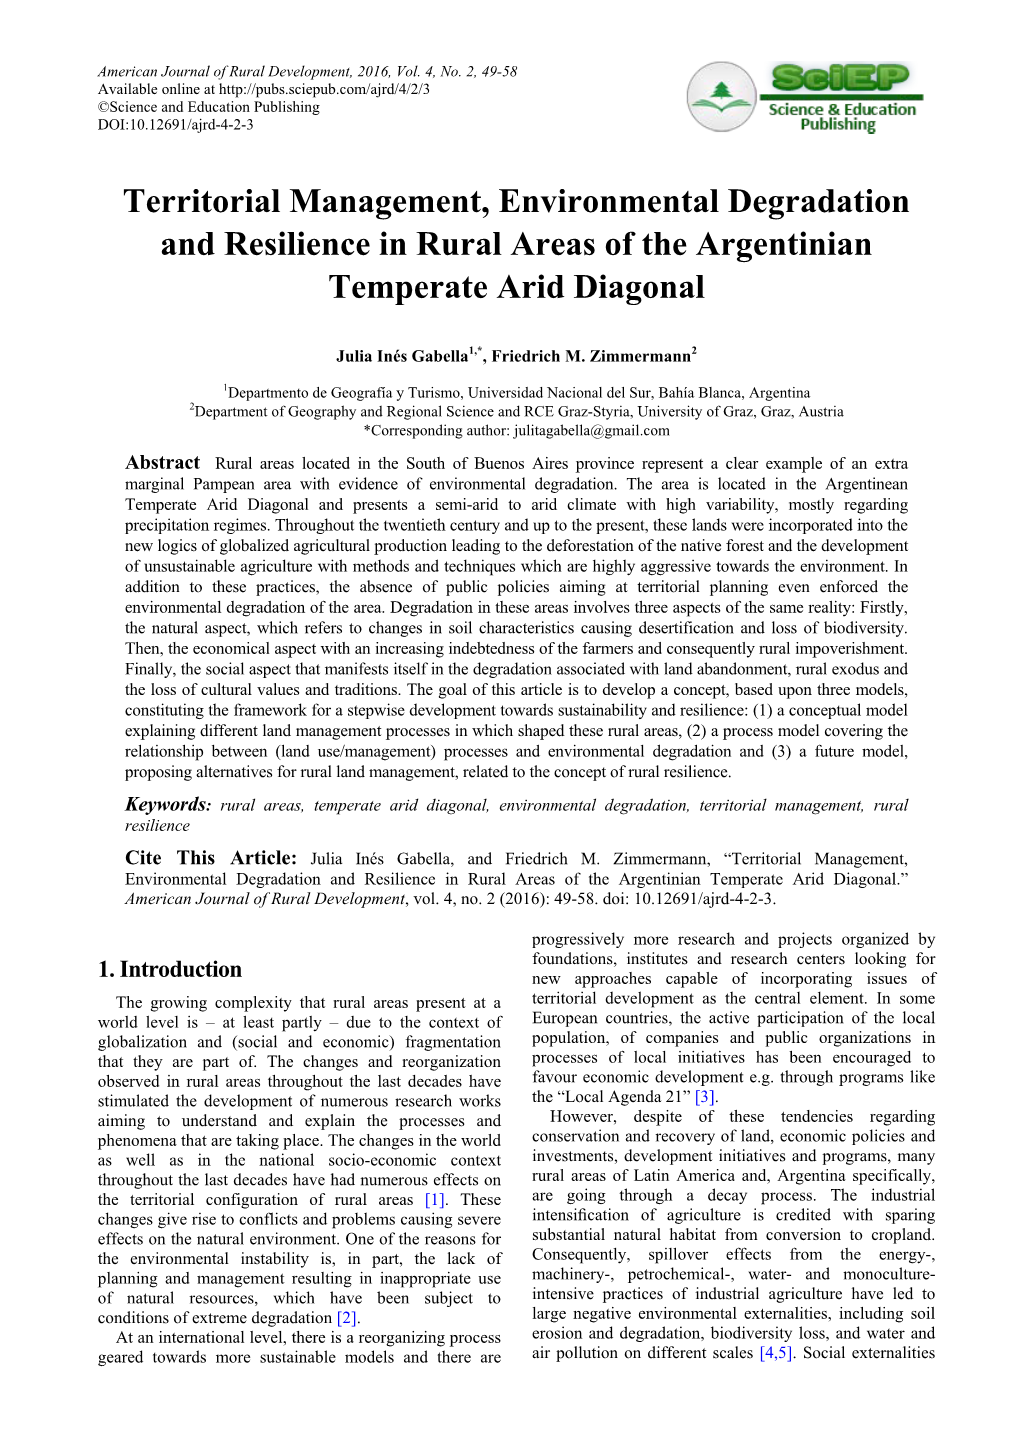 Territorial Management, Environmental Degradation and Resilience in Rural Areas of the Argentinian Temperate Arid Diagonal